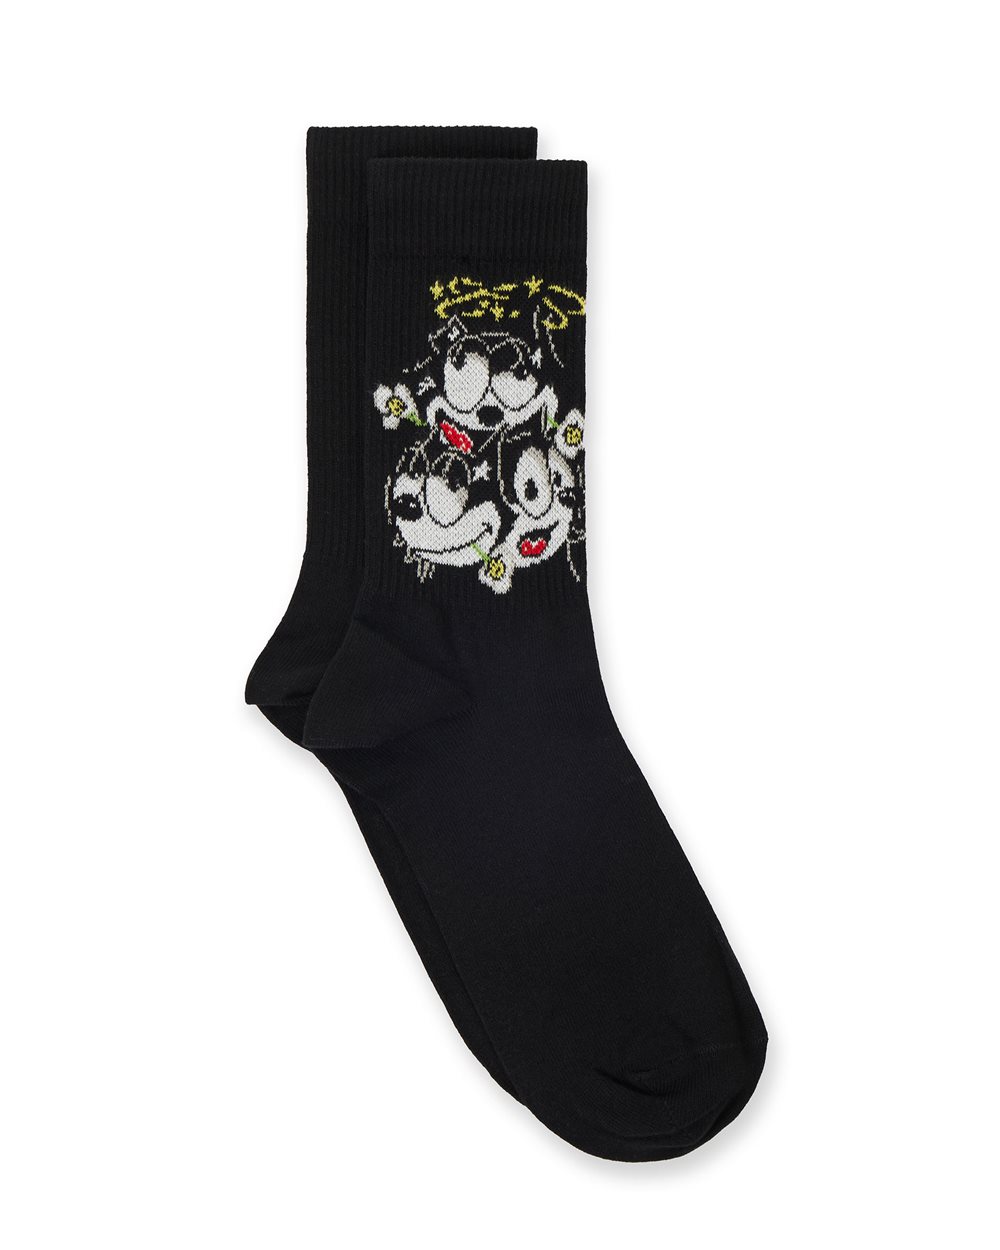 Sock with cartoon graphics - Accessories | Iceberg - Official Website